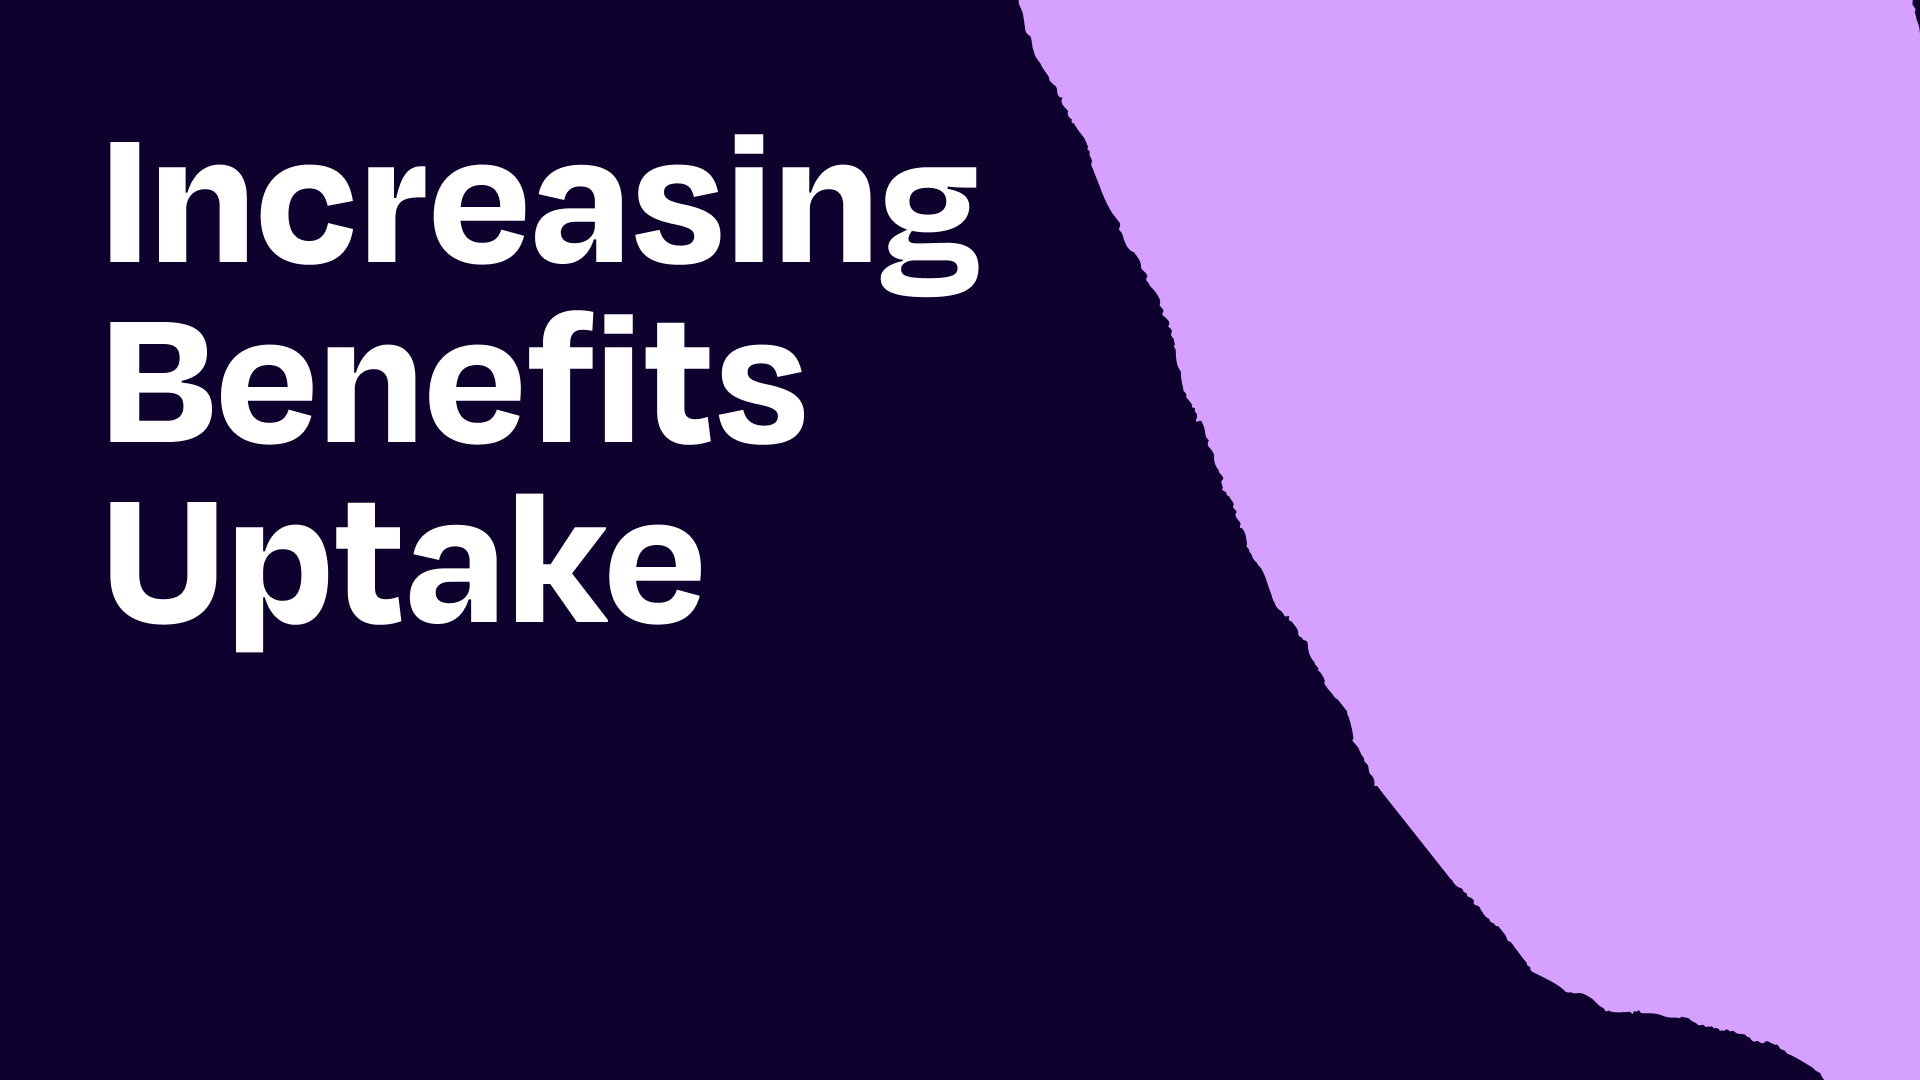 How to get more uptake across your employee benefits